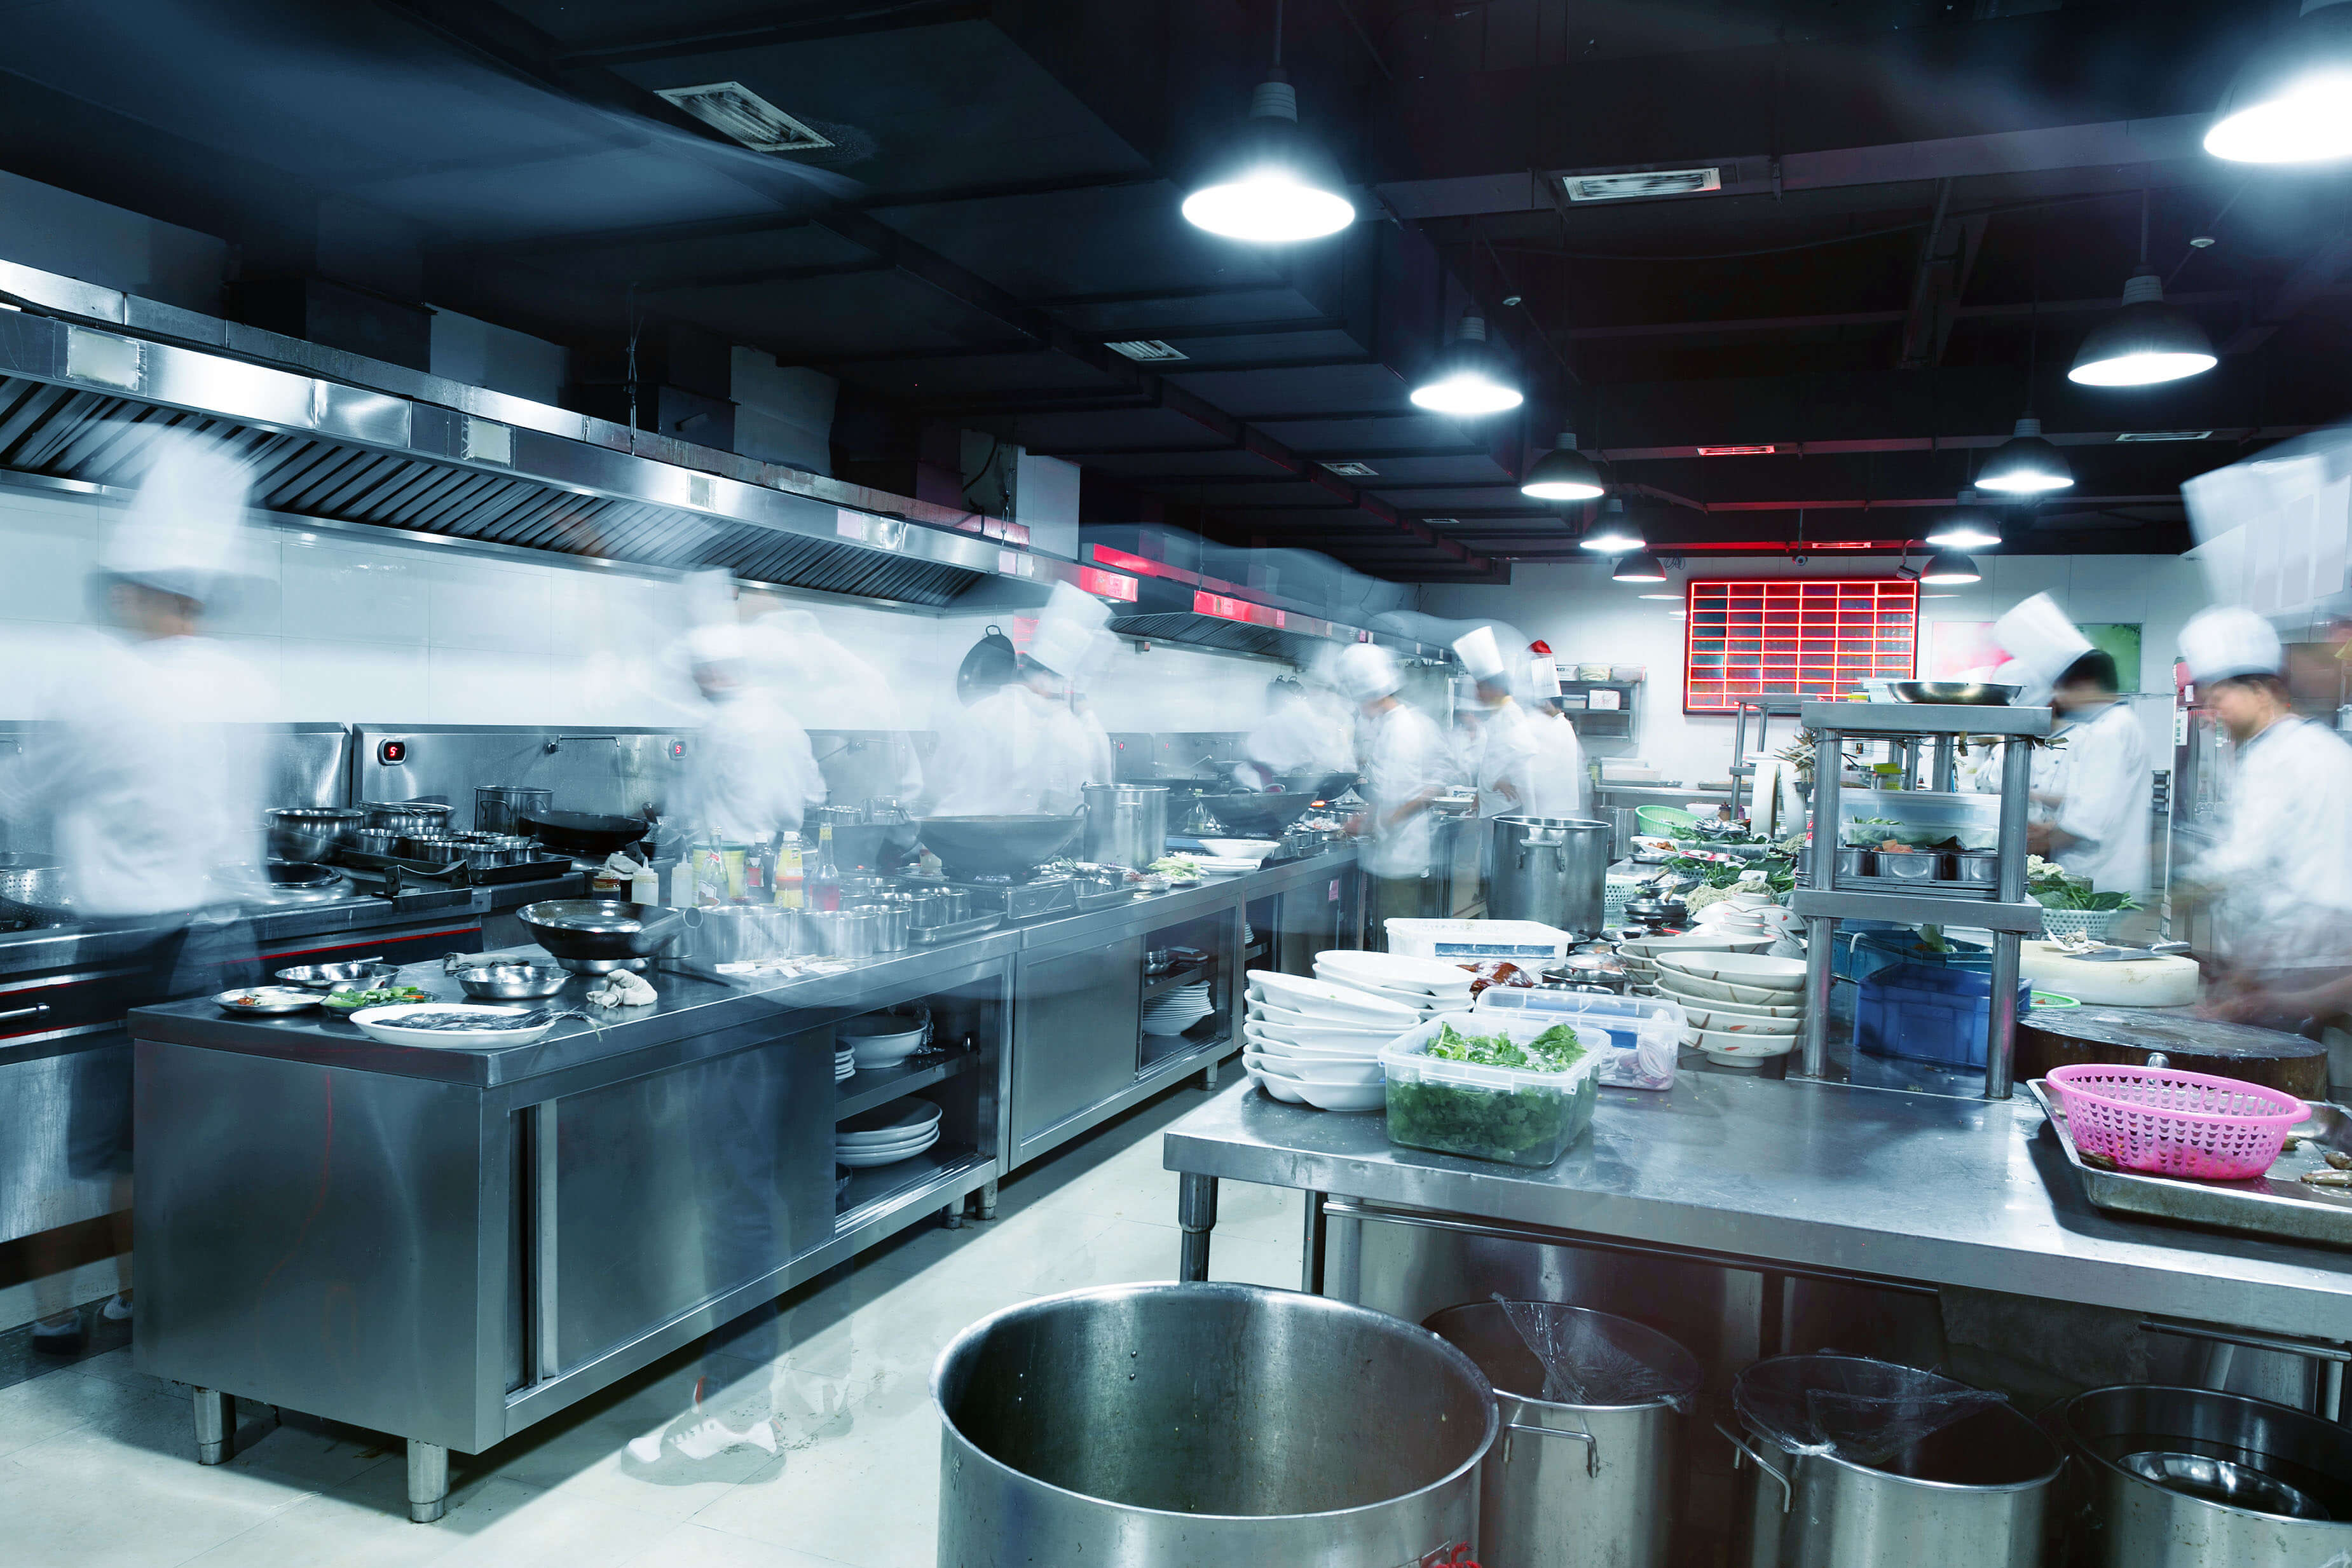 Antimicrobial Cladding Products For The Catering Industry